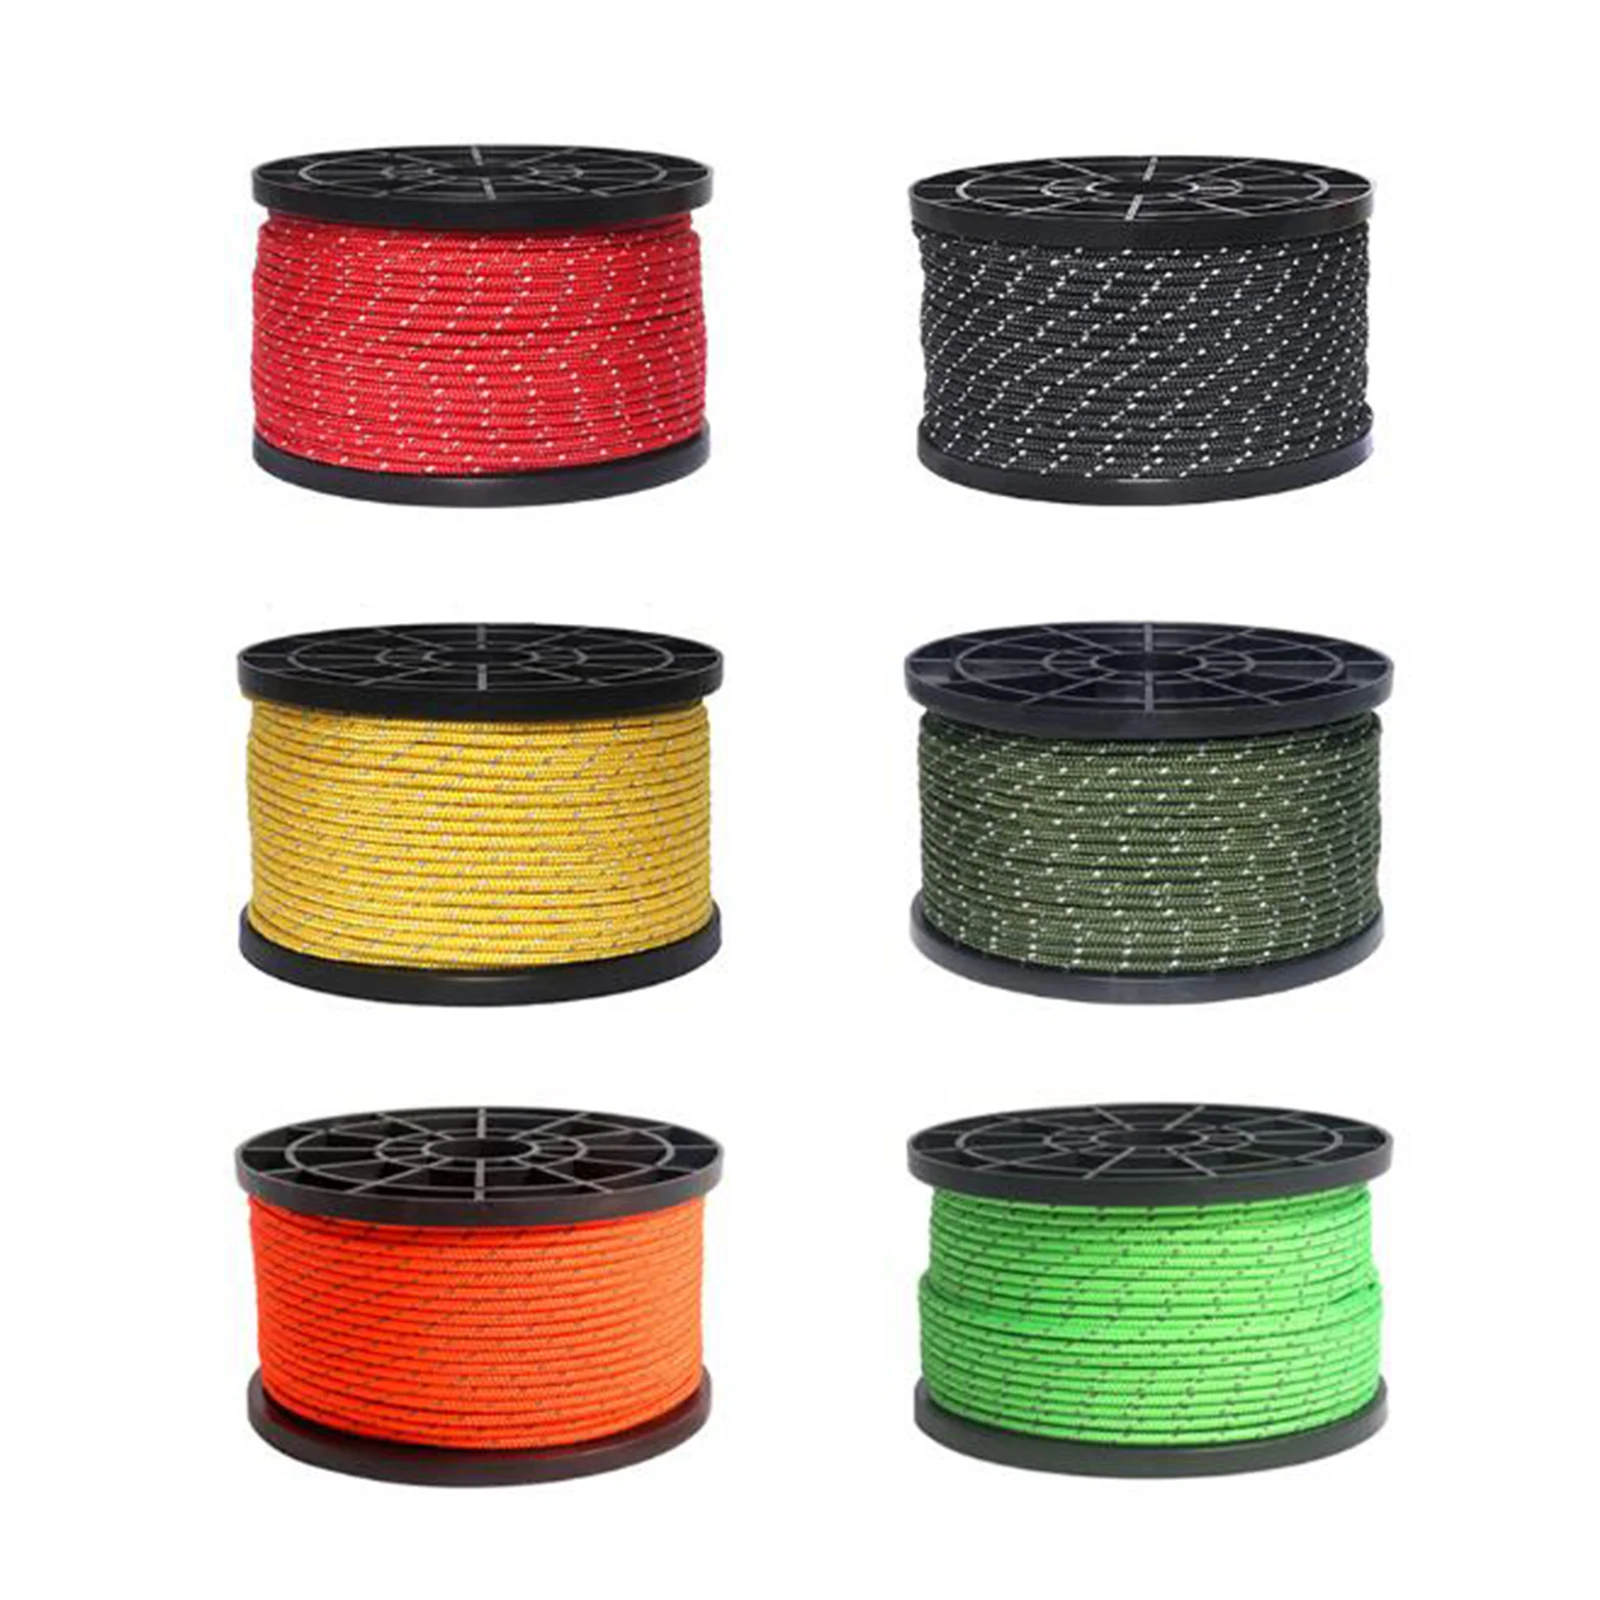 55 Yard Nylon Reflective Trip Guy Line Tent Rope Cord Paracord Outdoor Sailing Lanyard Hiking Accessories 3mm